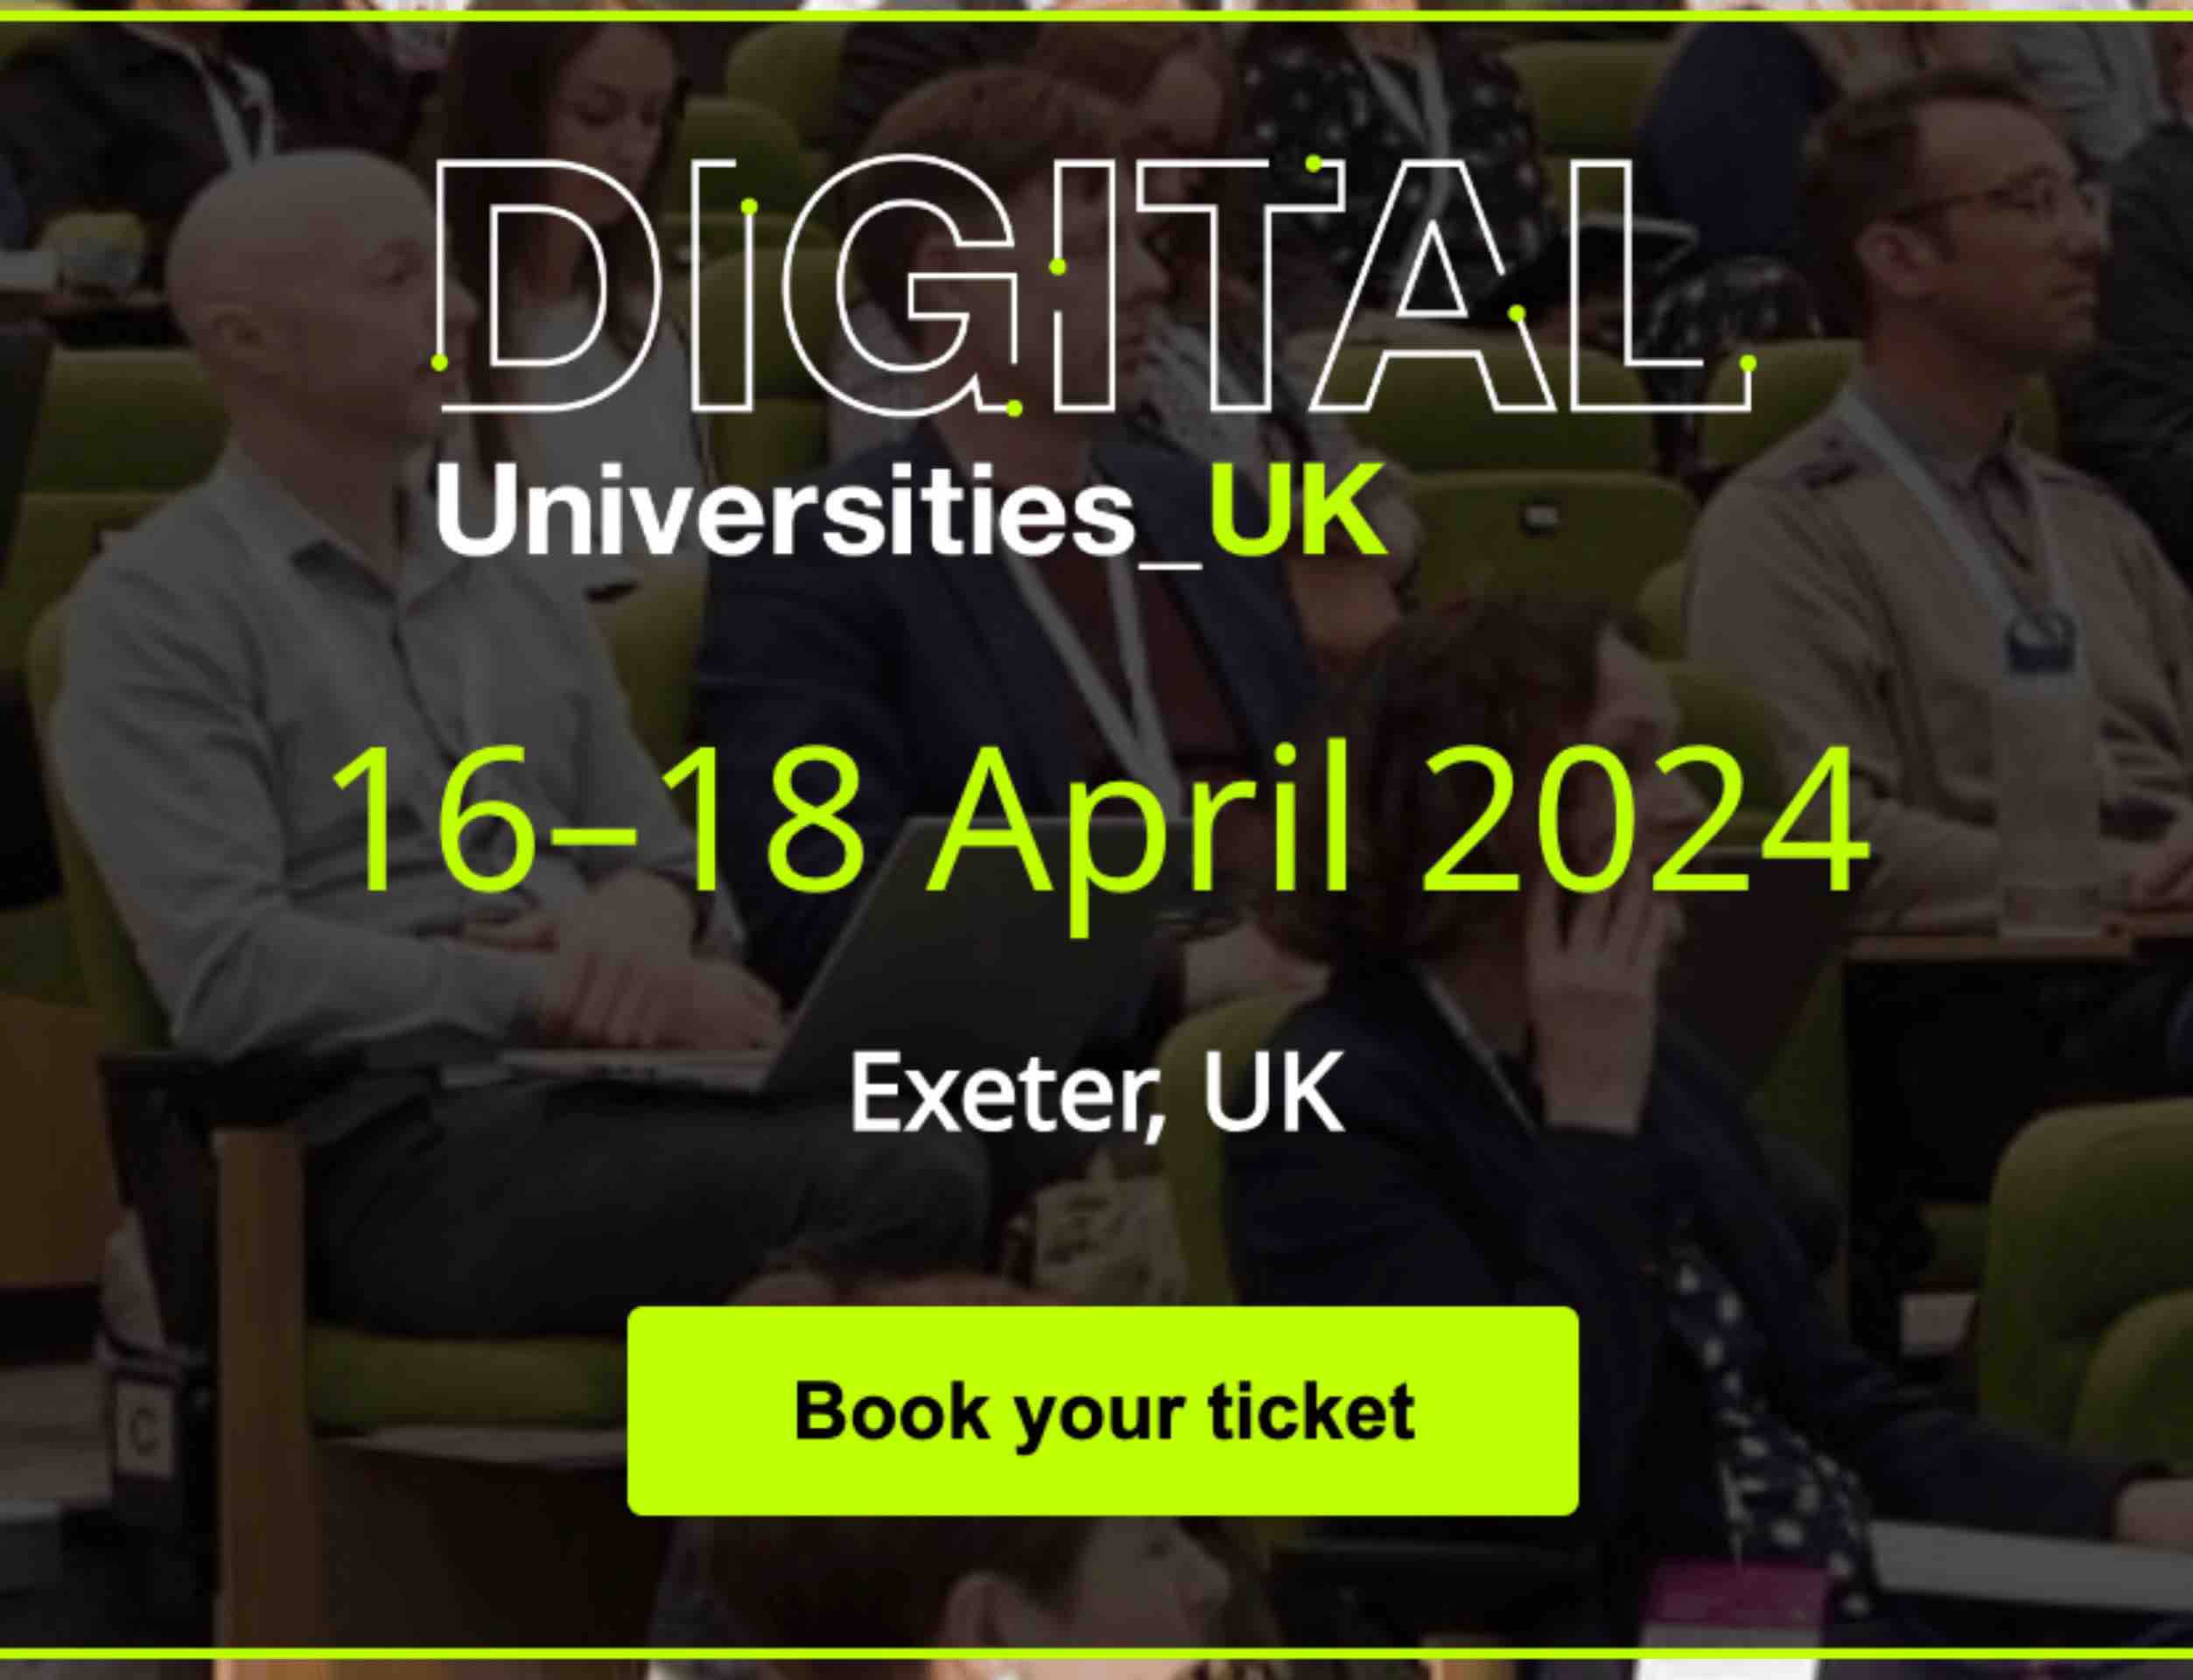 THE Digital Universities UK at the University of Exeter: What to Expect